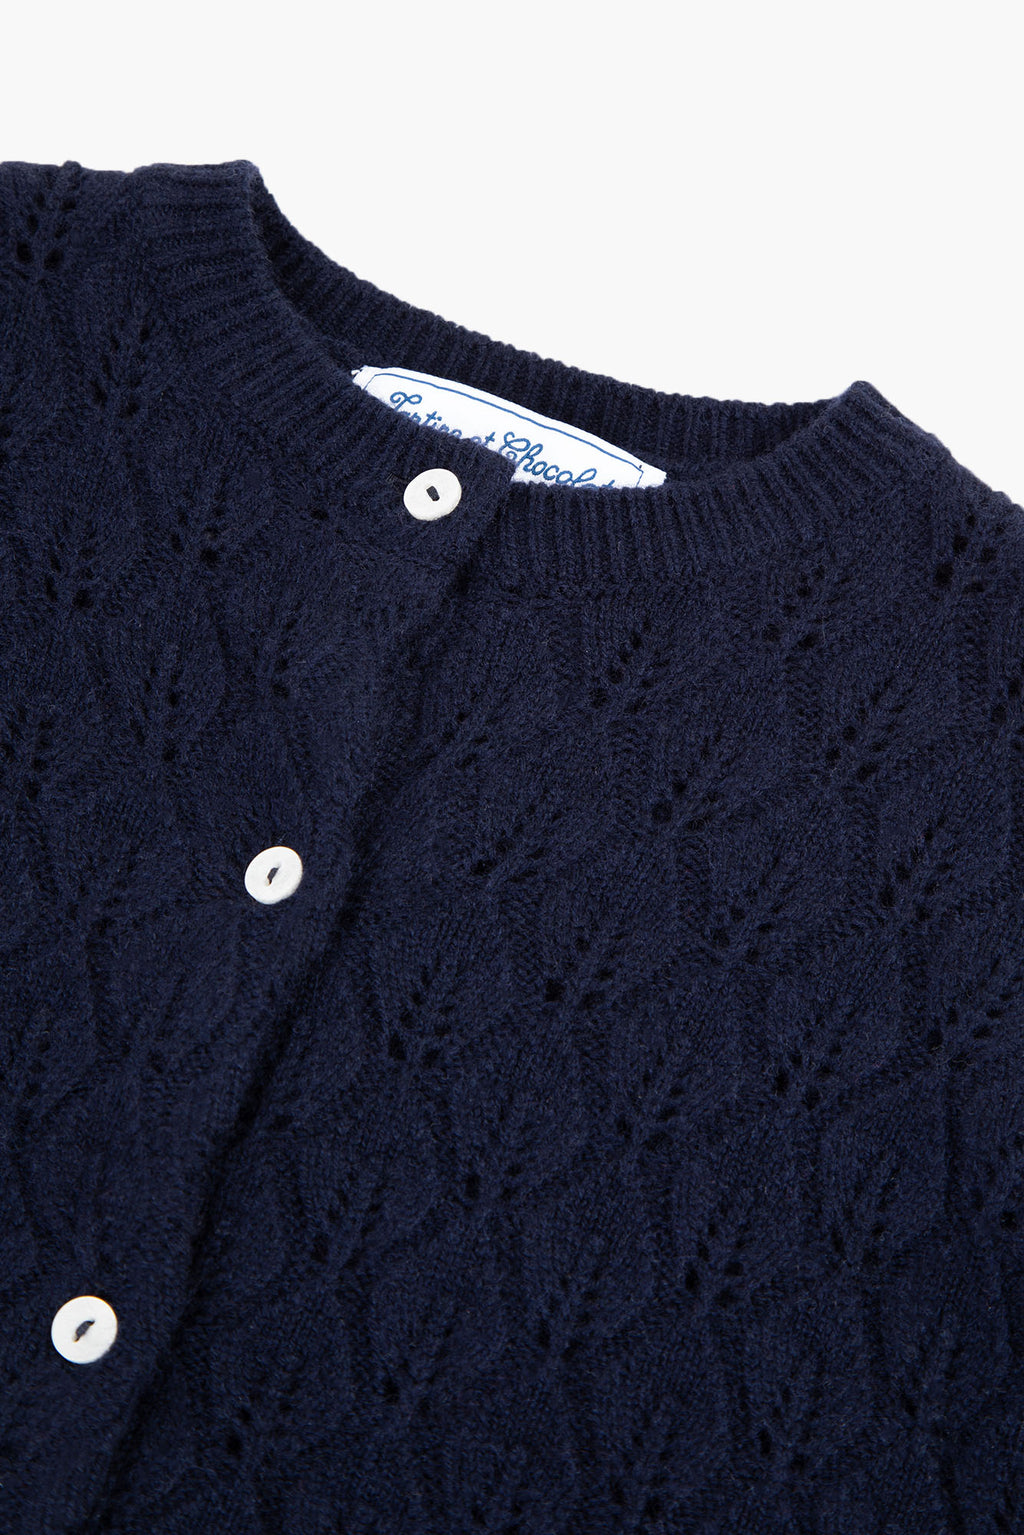 Cardigan - Navy knit leaves